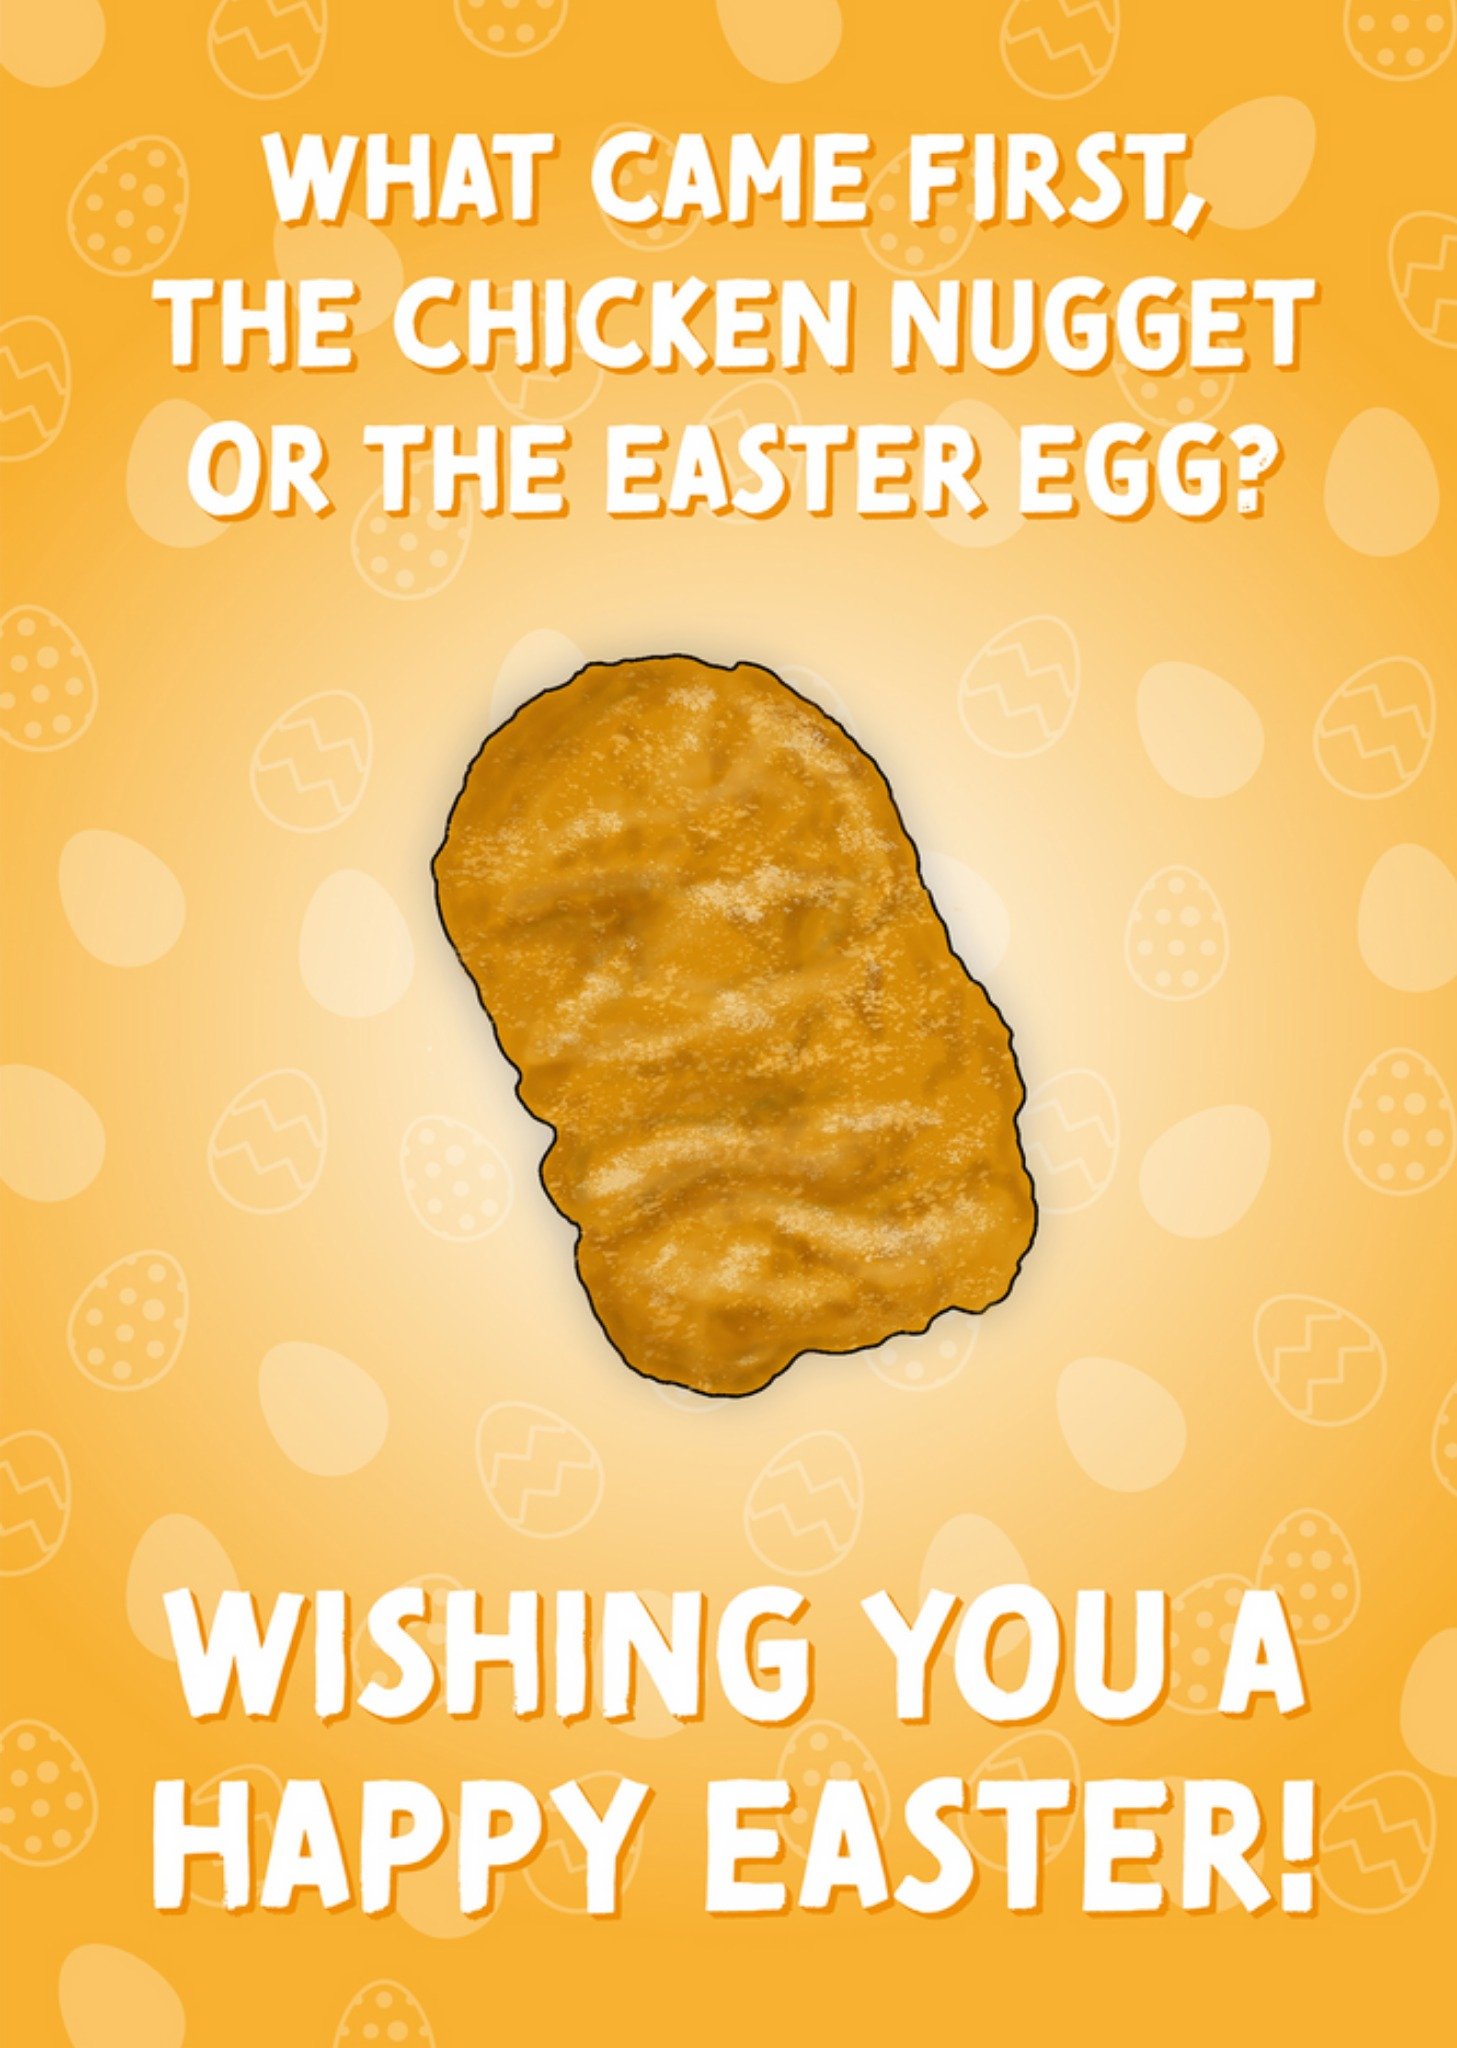 Moonpig Silly What Came First Chicken Nugget Or Easter Egg Card Ecard